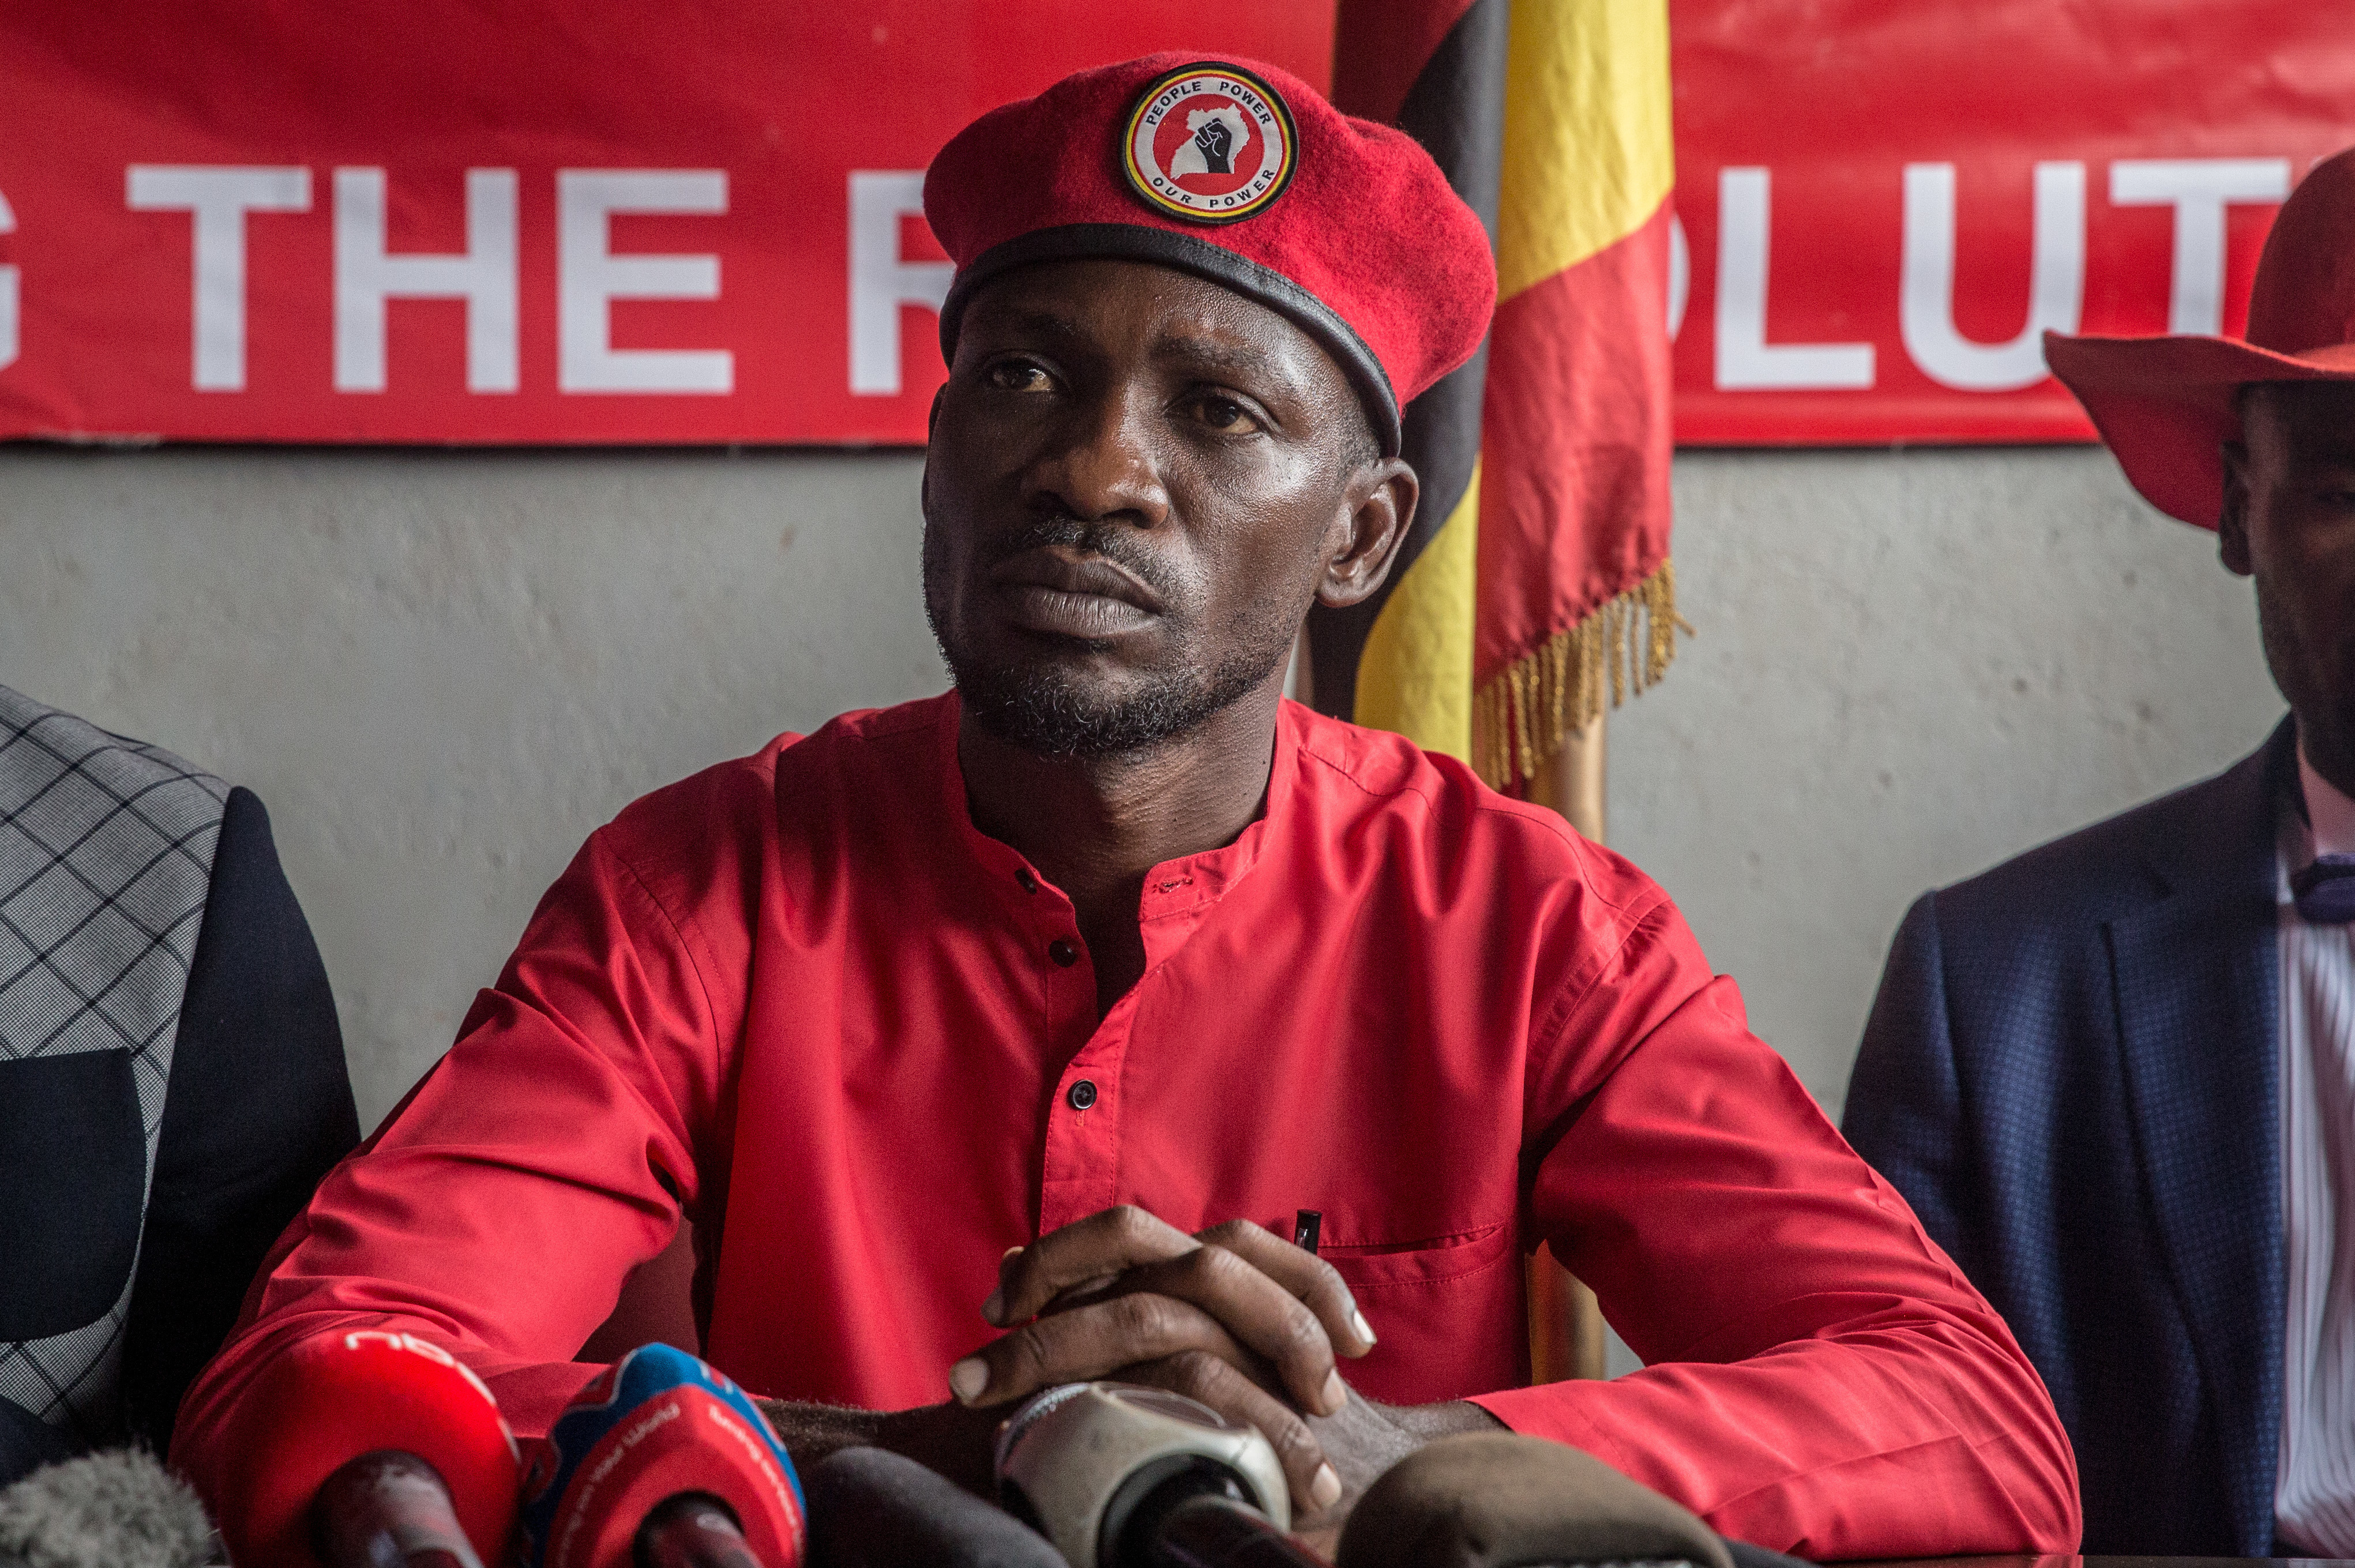 NUP President Bobi Wine says the Anti Homosexuality bill is only a diversion by His Excellency Y.K Museveni to make Ugandans forget about important affairs.